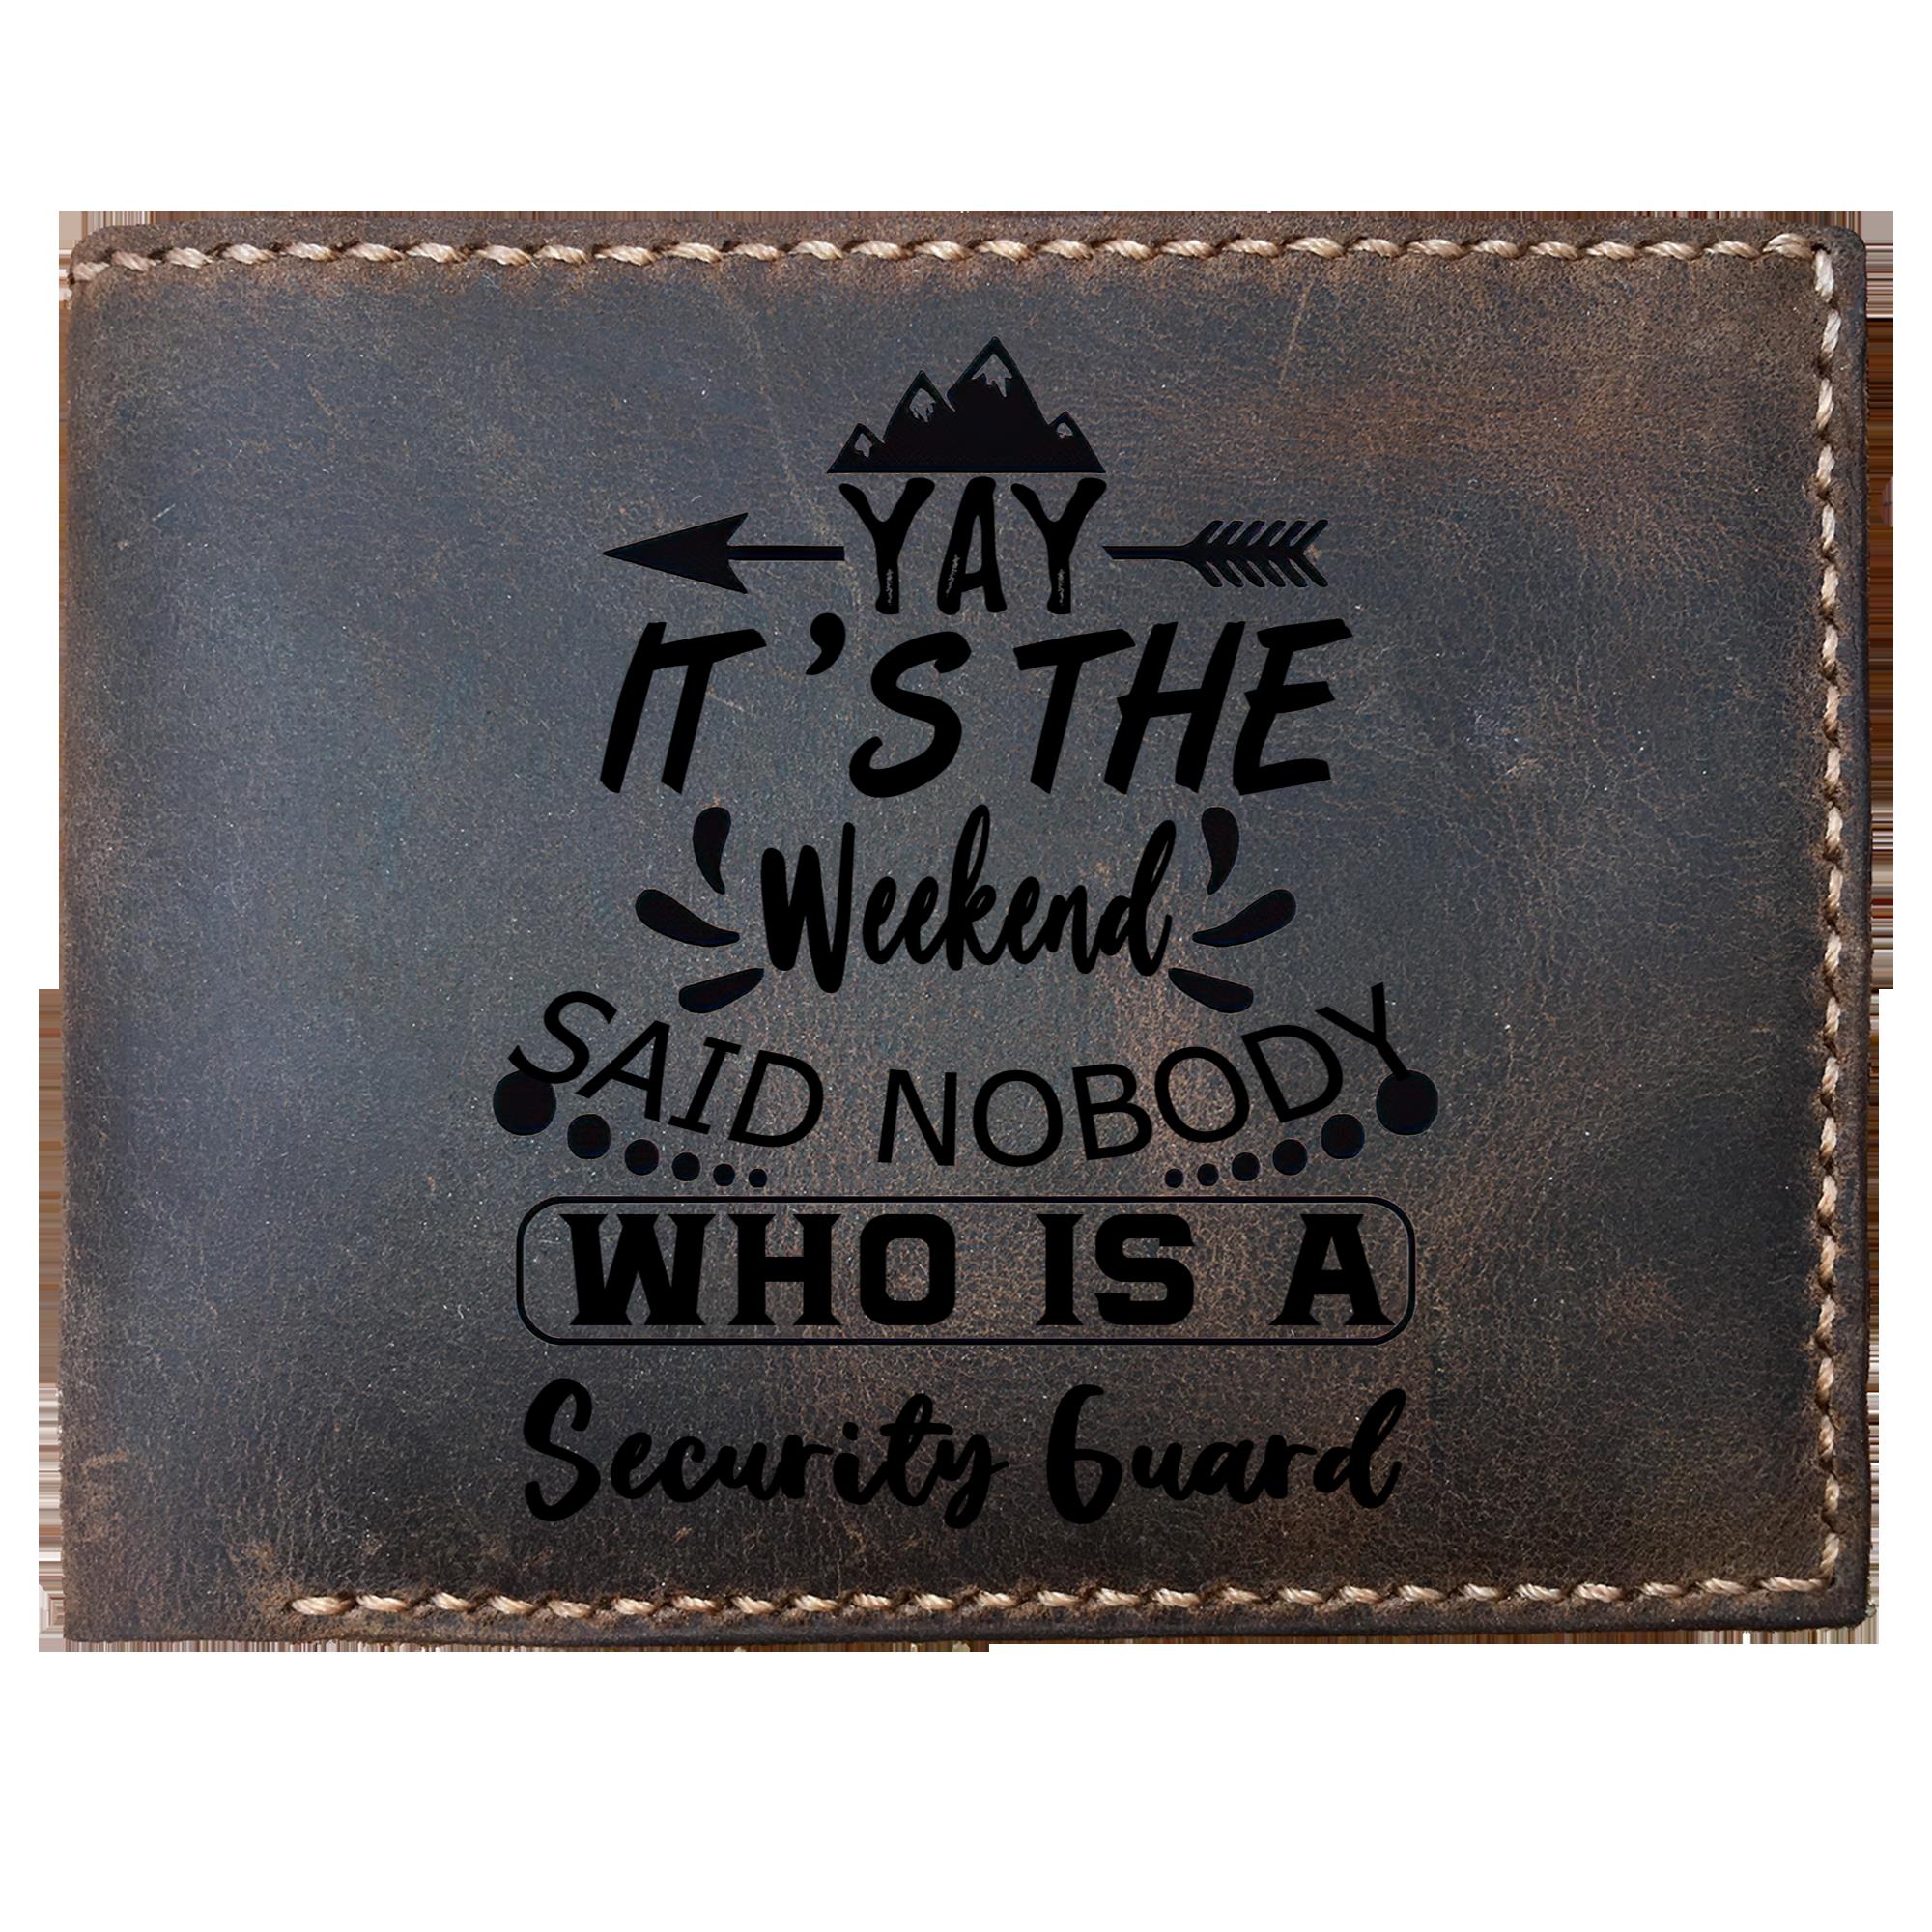 Skitongifts Funny Custom Laser Engraved Bifold Leather Wallet For Men, It's The Weekend Said Nobody Who Is A Security Guard, Father's Day Gifts